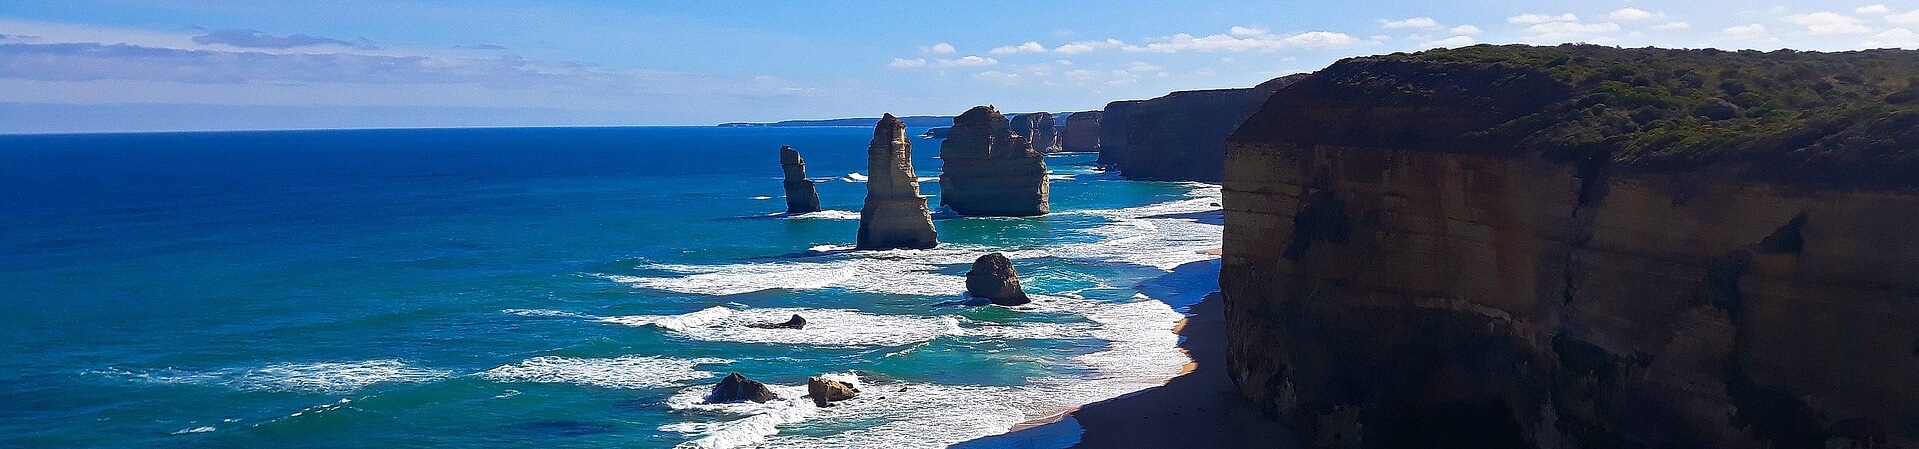 Does it cost money to see the 12 Apostles?